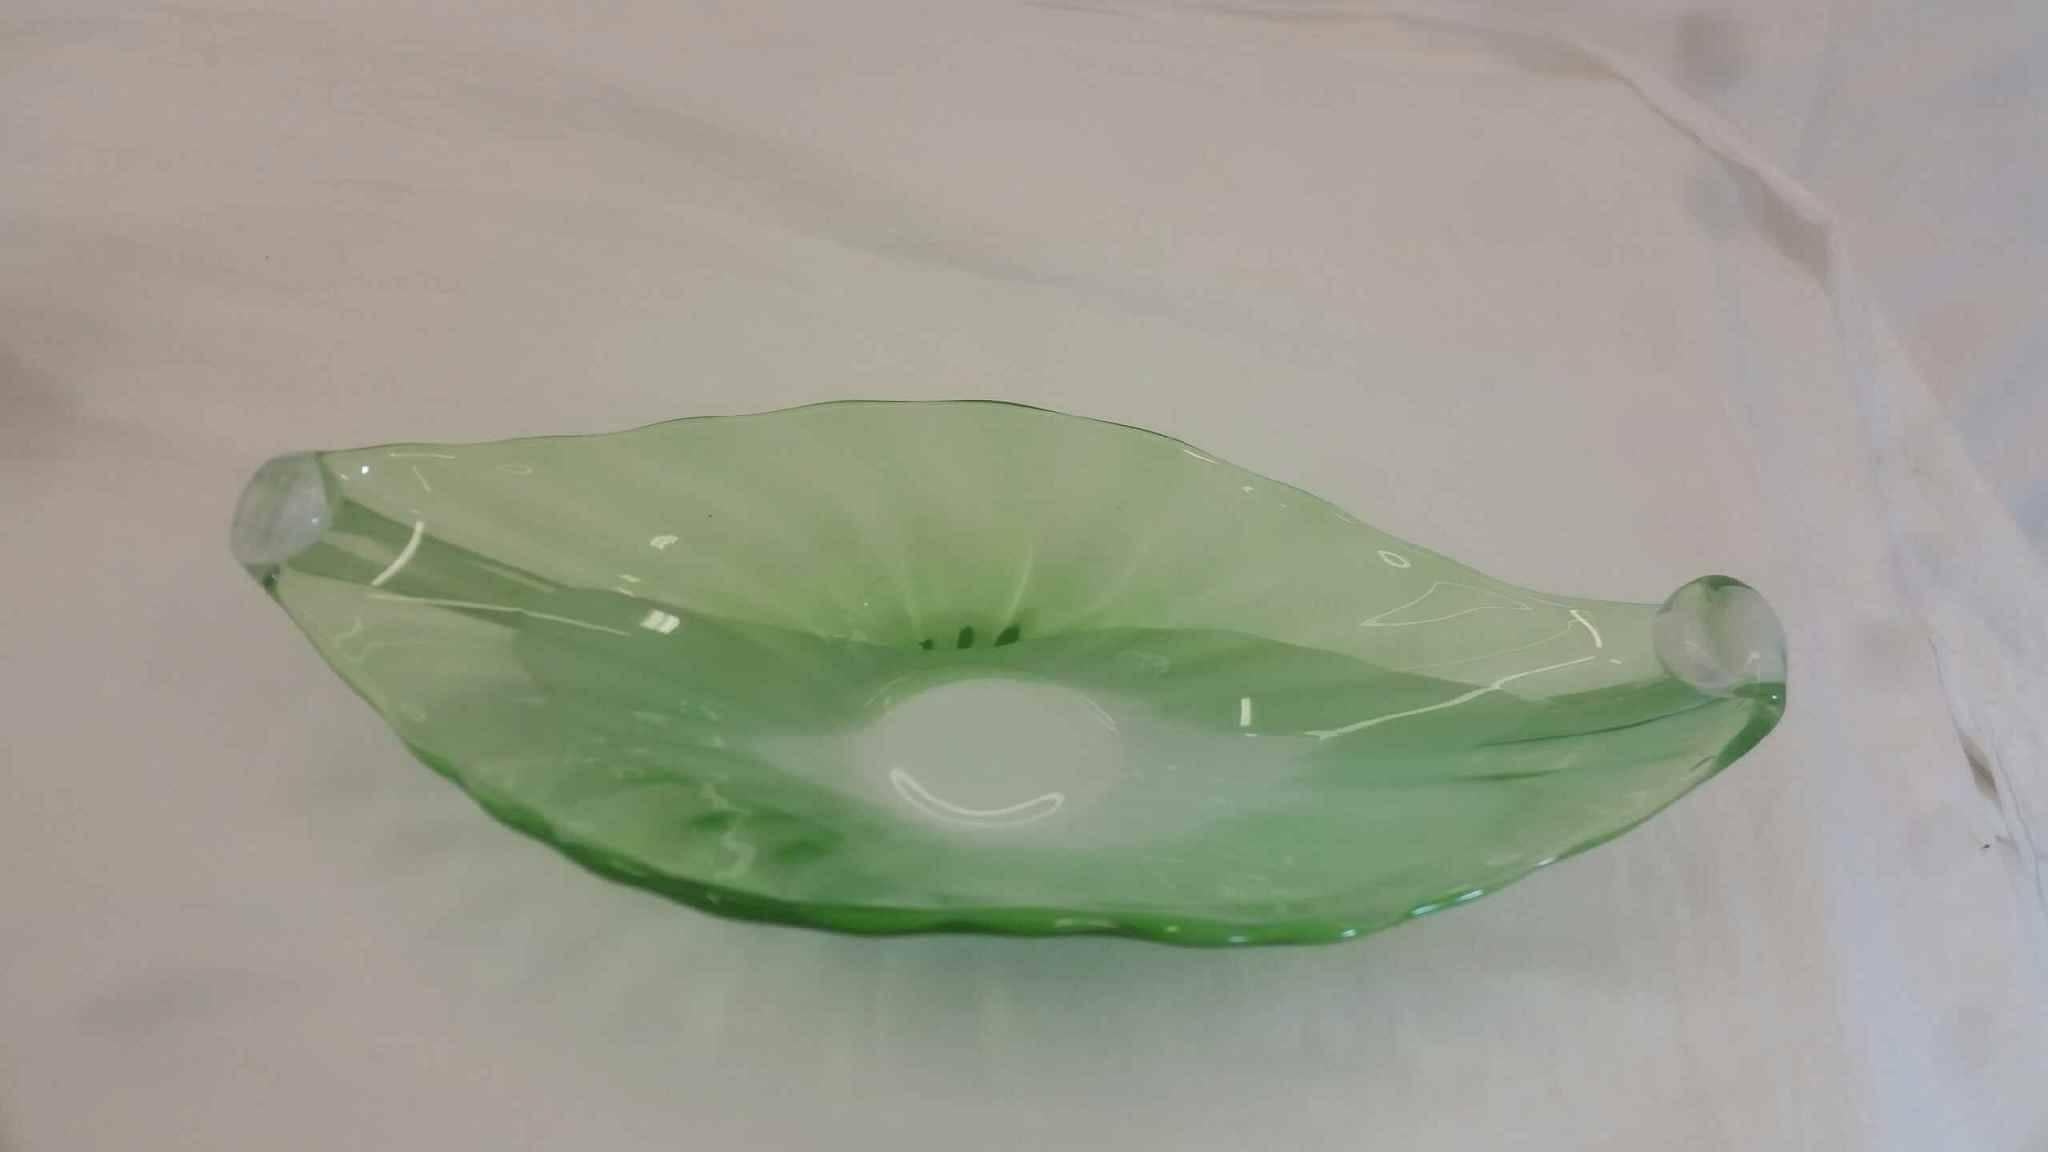 Presenting this lovely green centerpiece in festive green to grace your holiday table. Gondola shape perfect for fruit or flowers. Made in Italy.